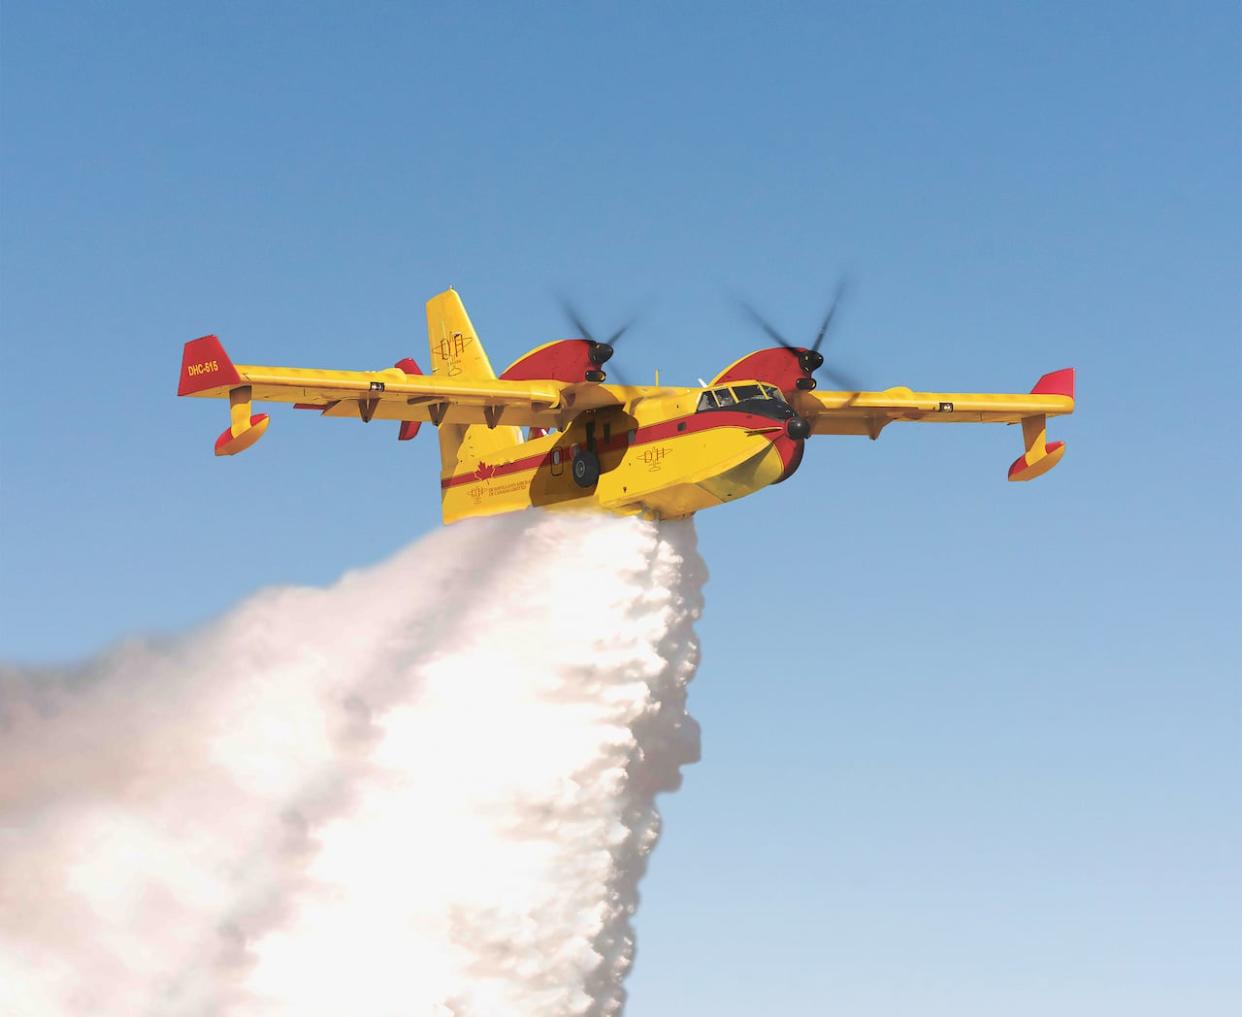 According to De Havilland Canada, DHC-515 Firefighter planes can deliver multiple drops of water in rapid succession and handle high winds that are often present with large scale wildfires.  (N. Fazos/De Havilland Canada - image credit)